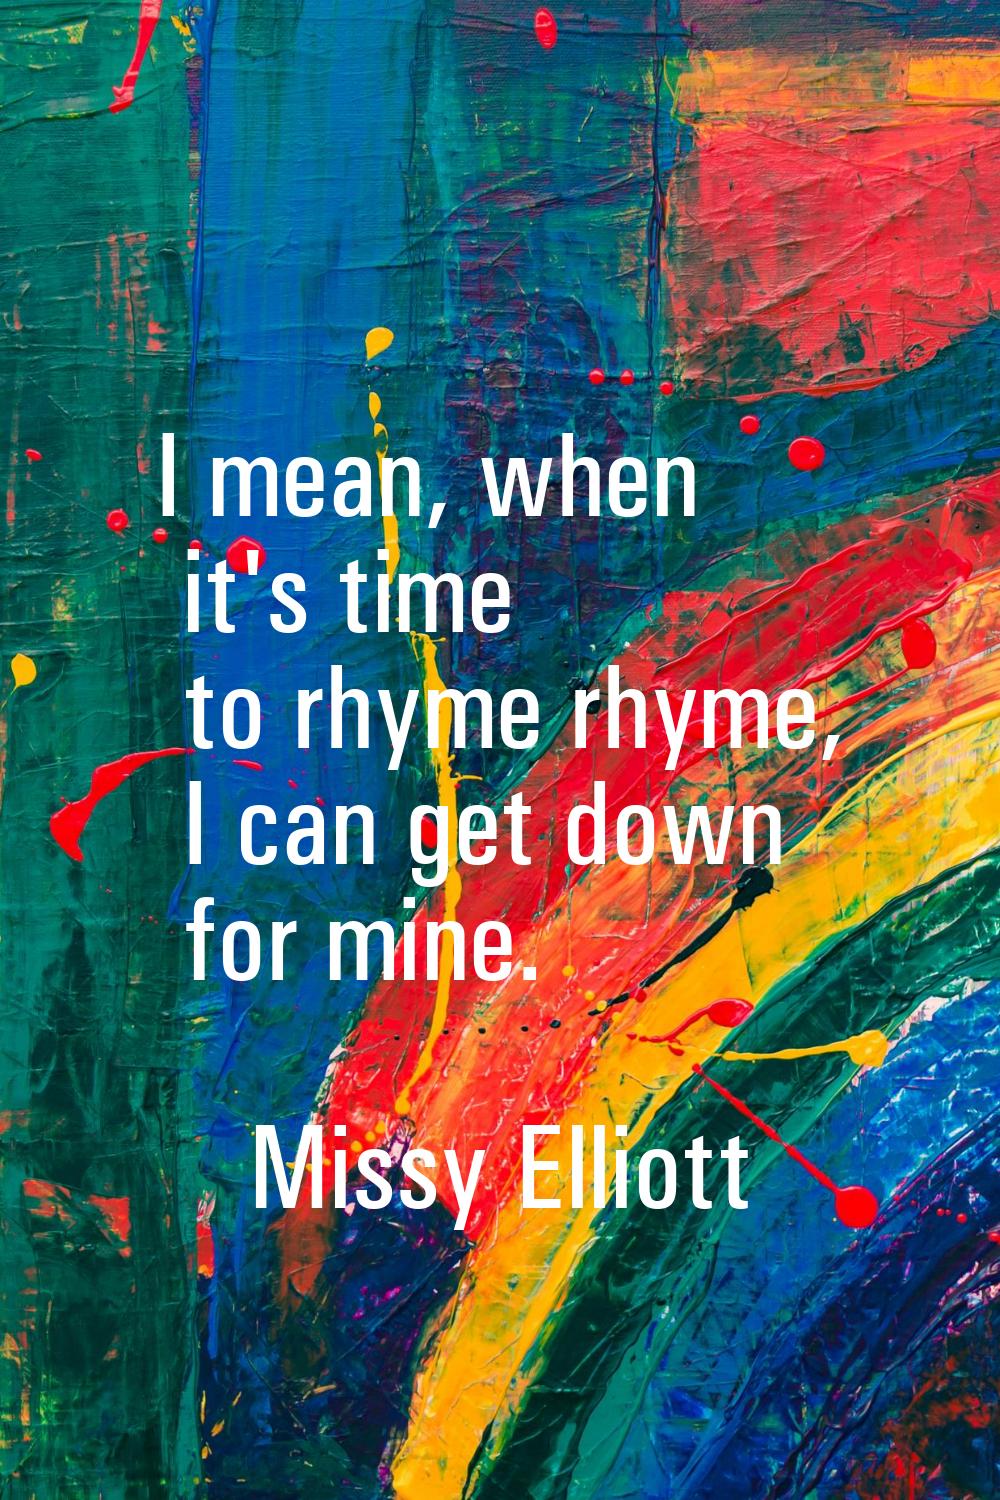 I mean, when it's time to rhyme rhyme, I can get down for mine.